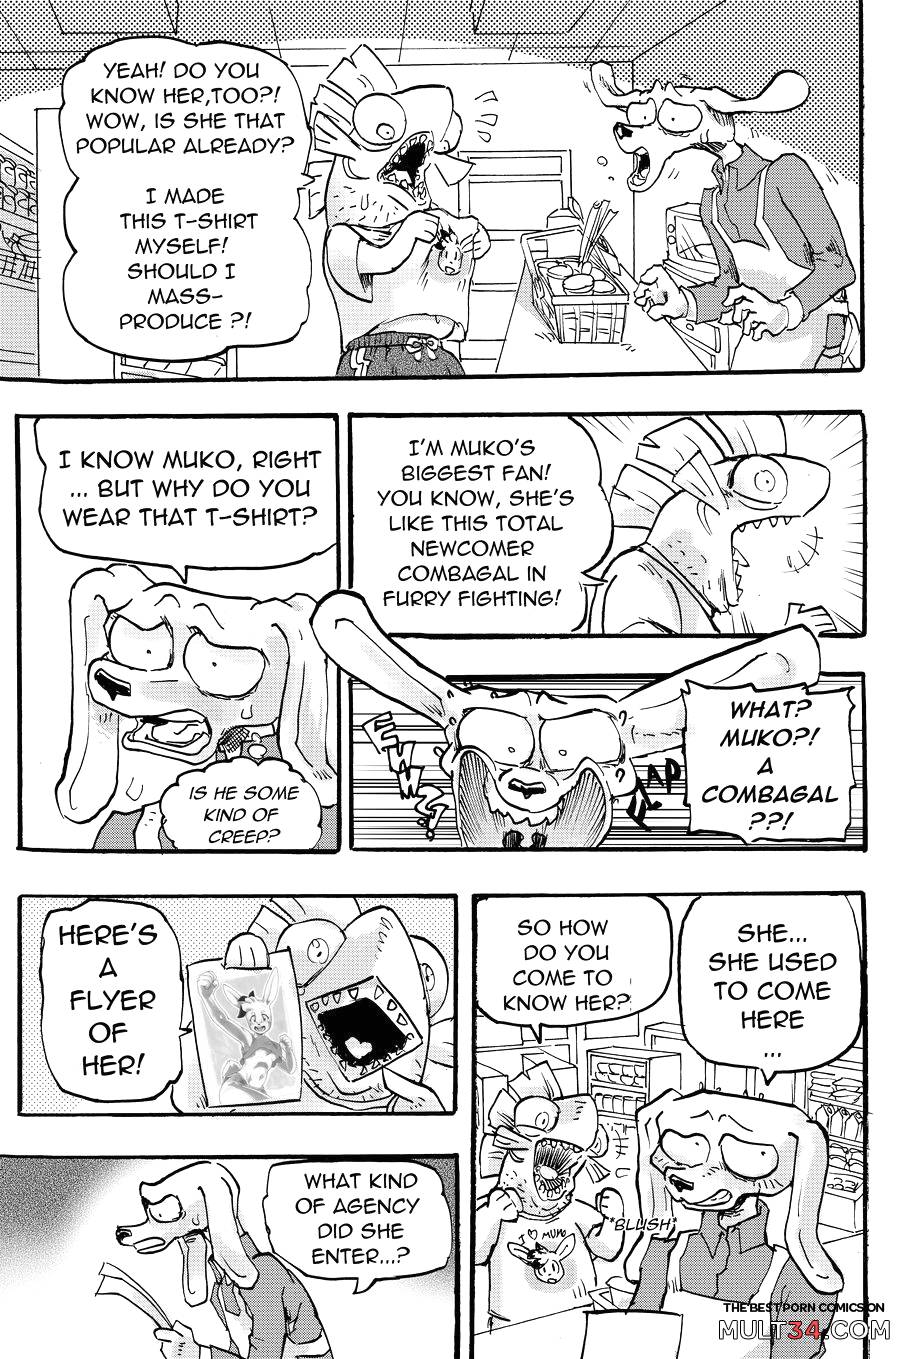 Furry Fight Chronicles 8 page 3